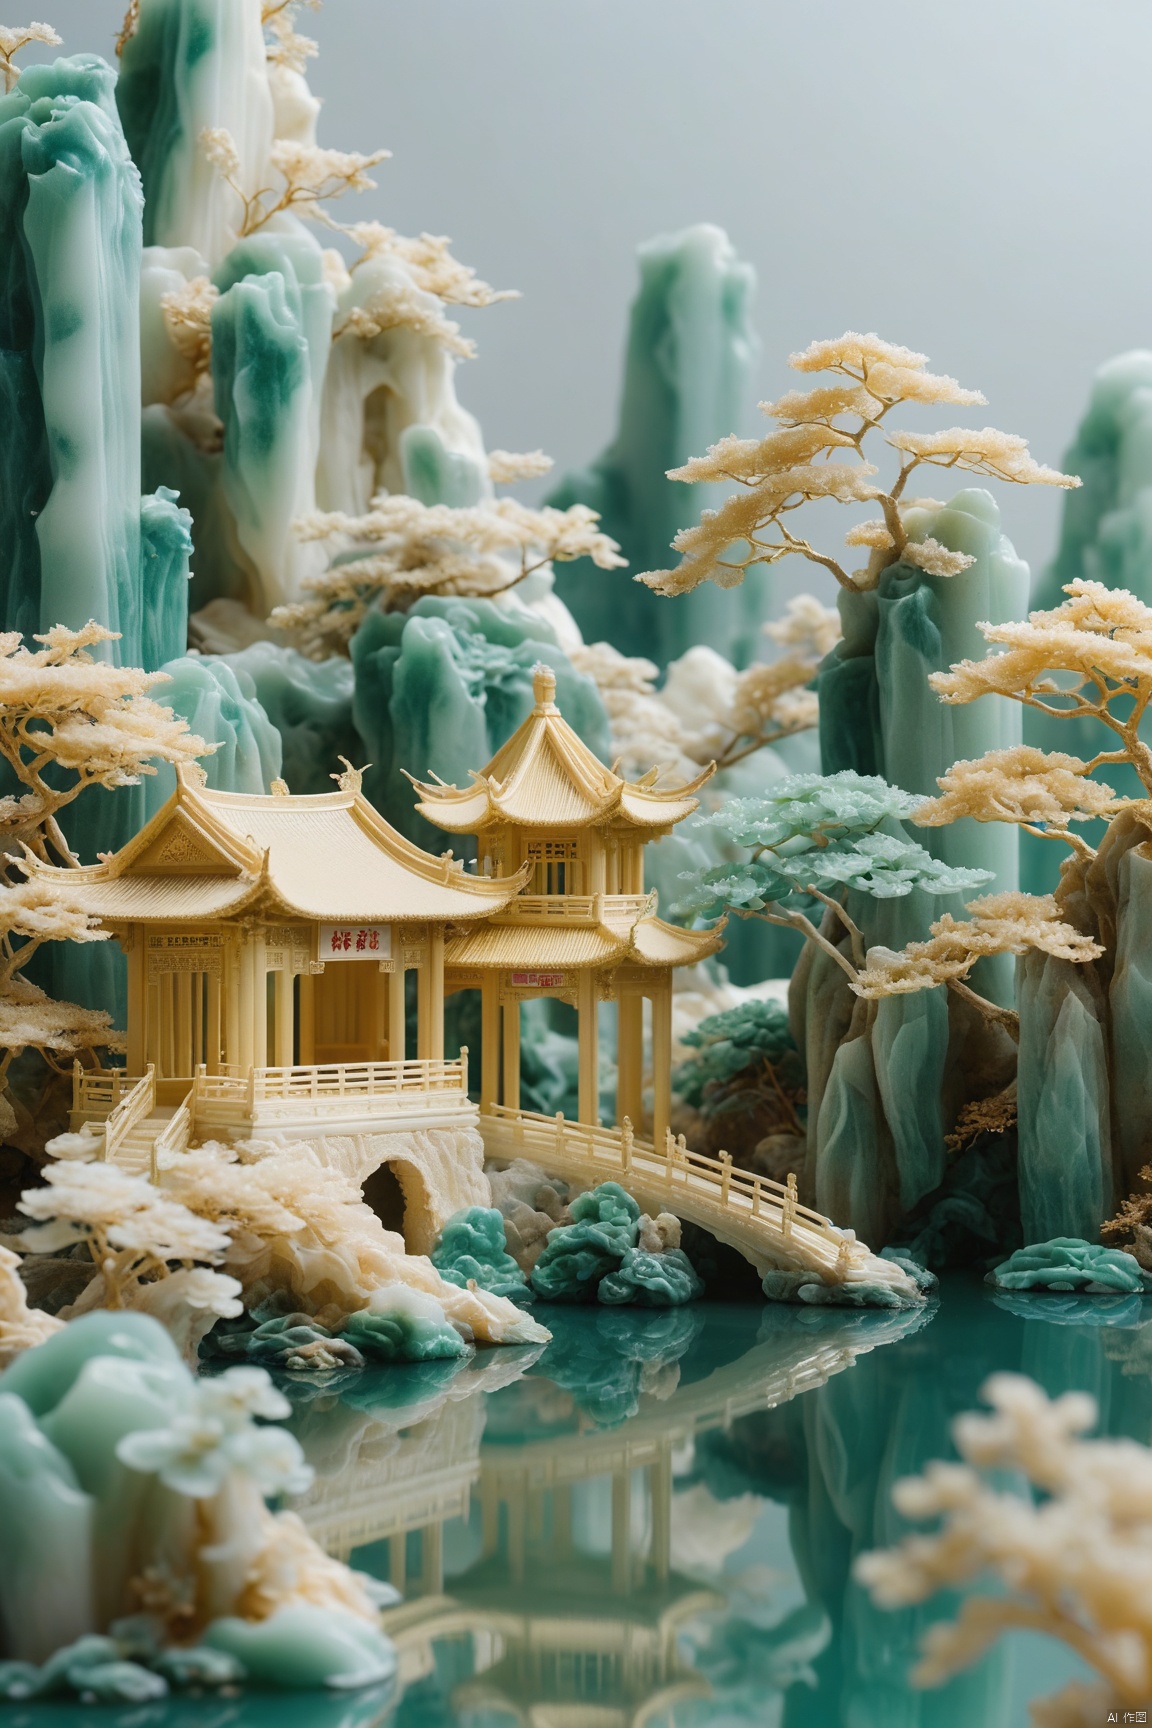  HUBG_Chinese_Jade, Palace,wide shot,

Pavilions and pavilions, winding water